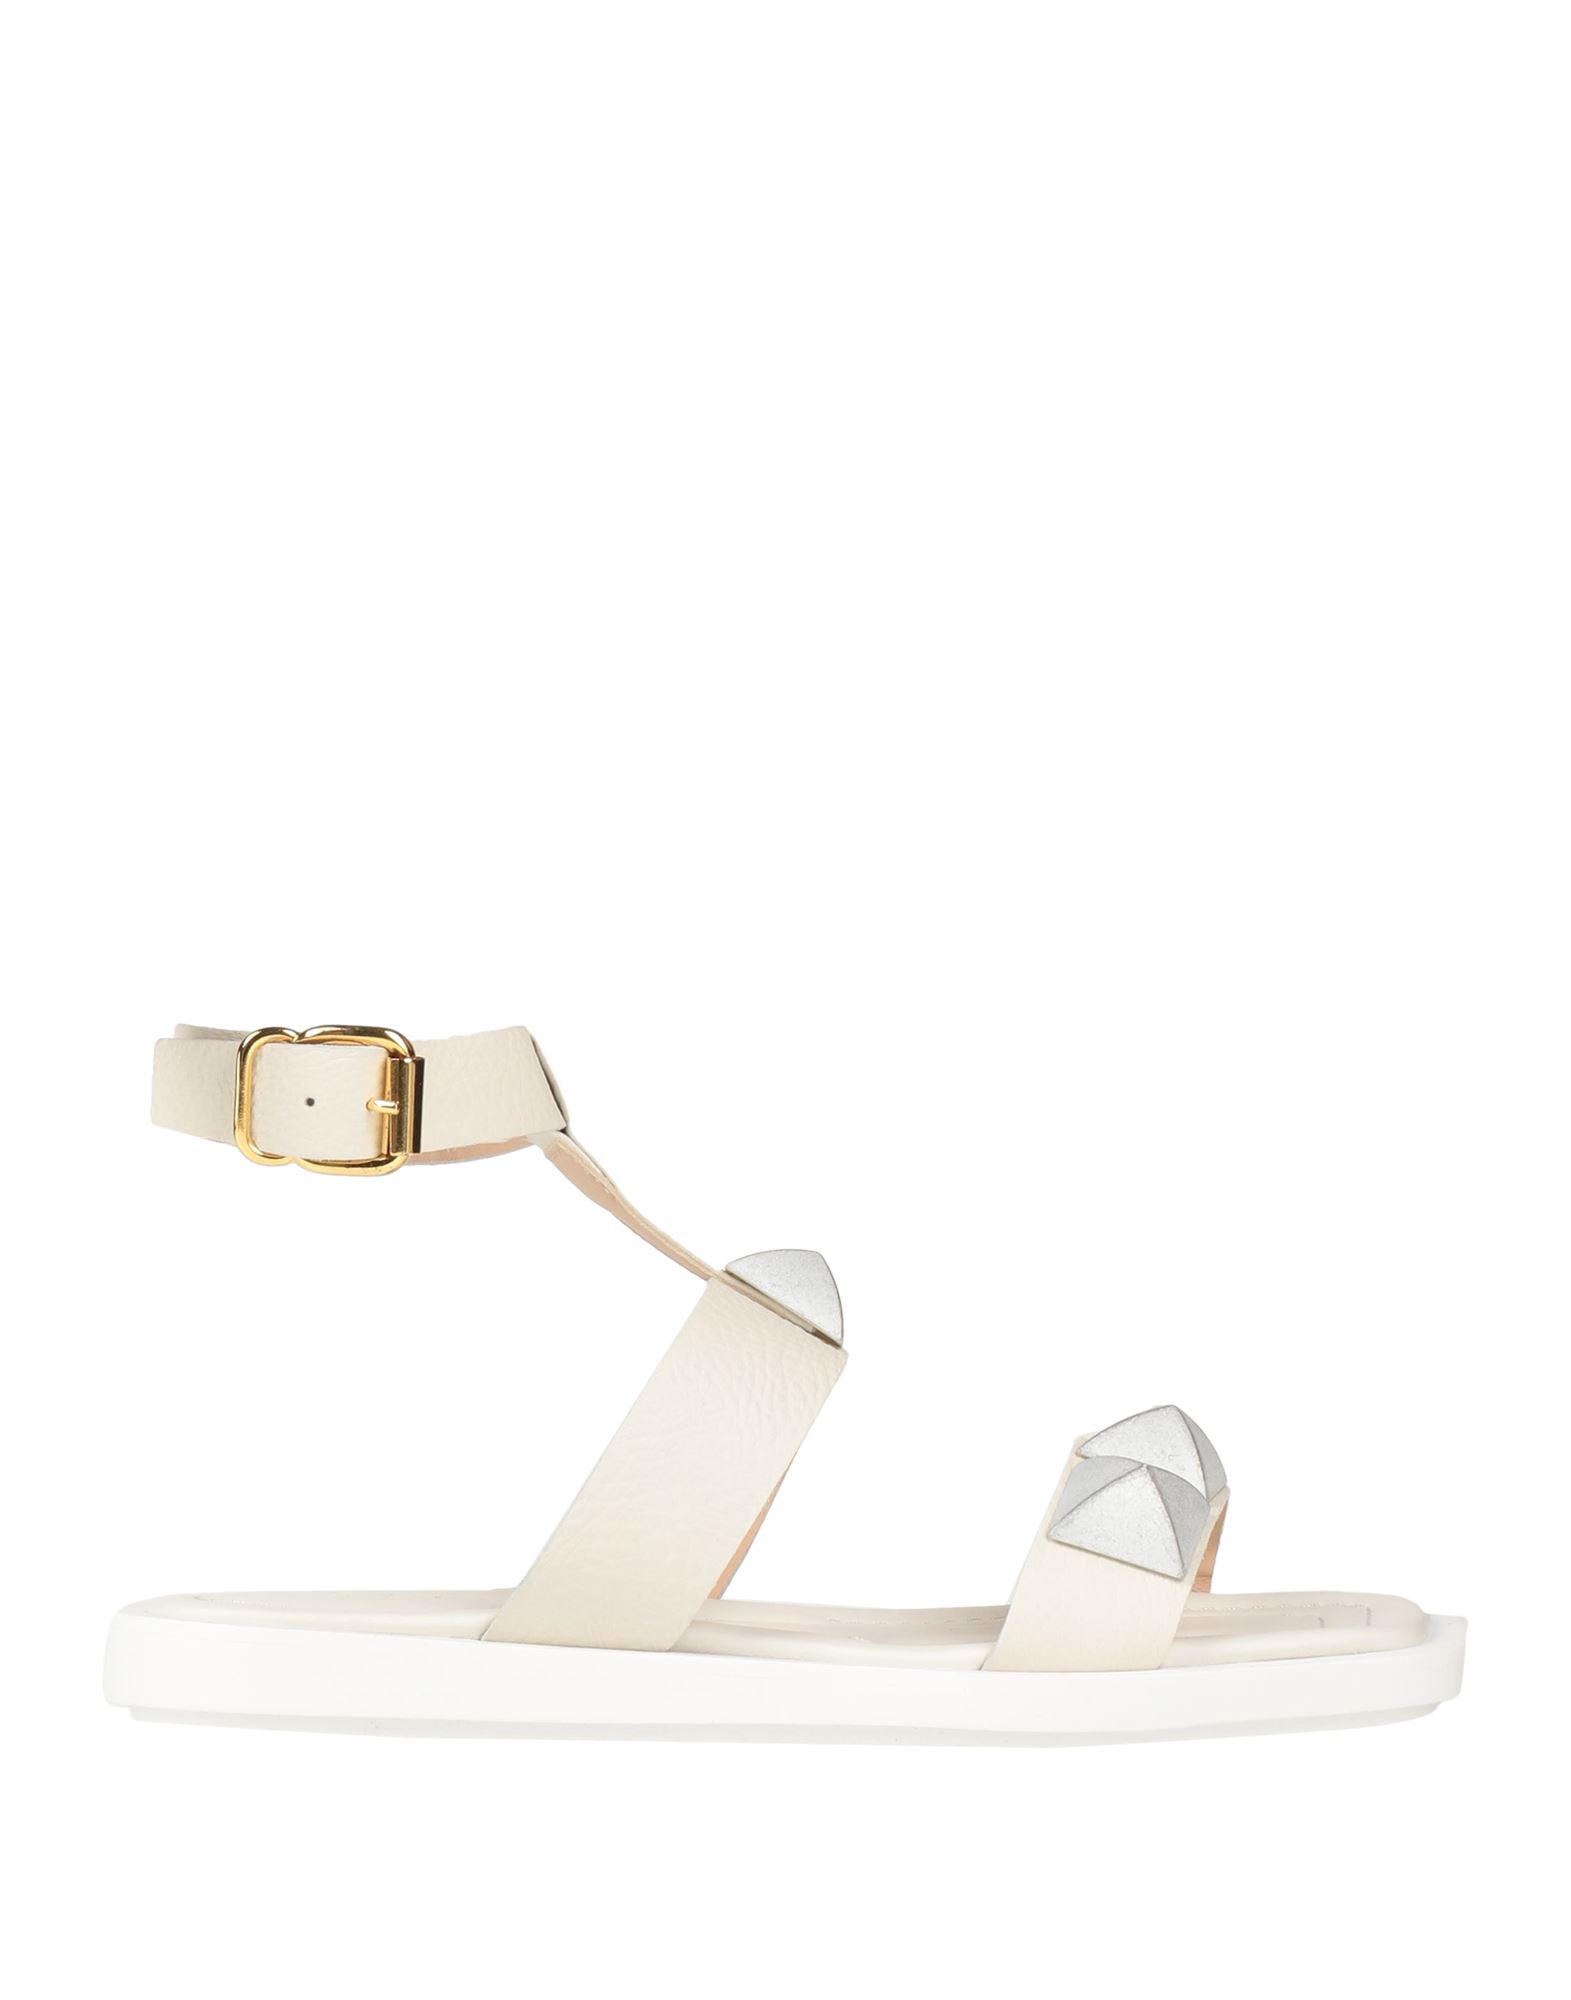 Janet & Janet Woman Sandals Off White Size 7 Soft Leather